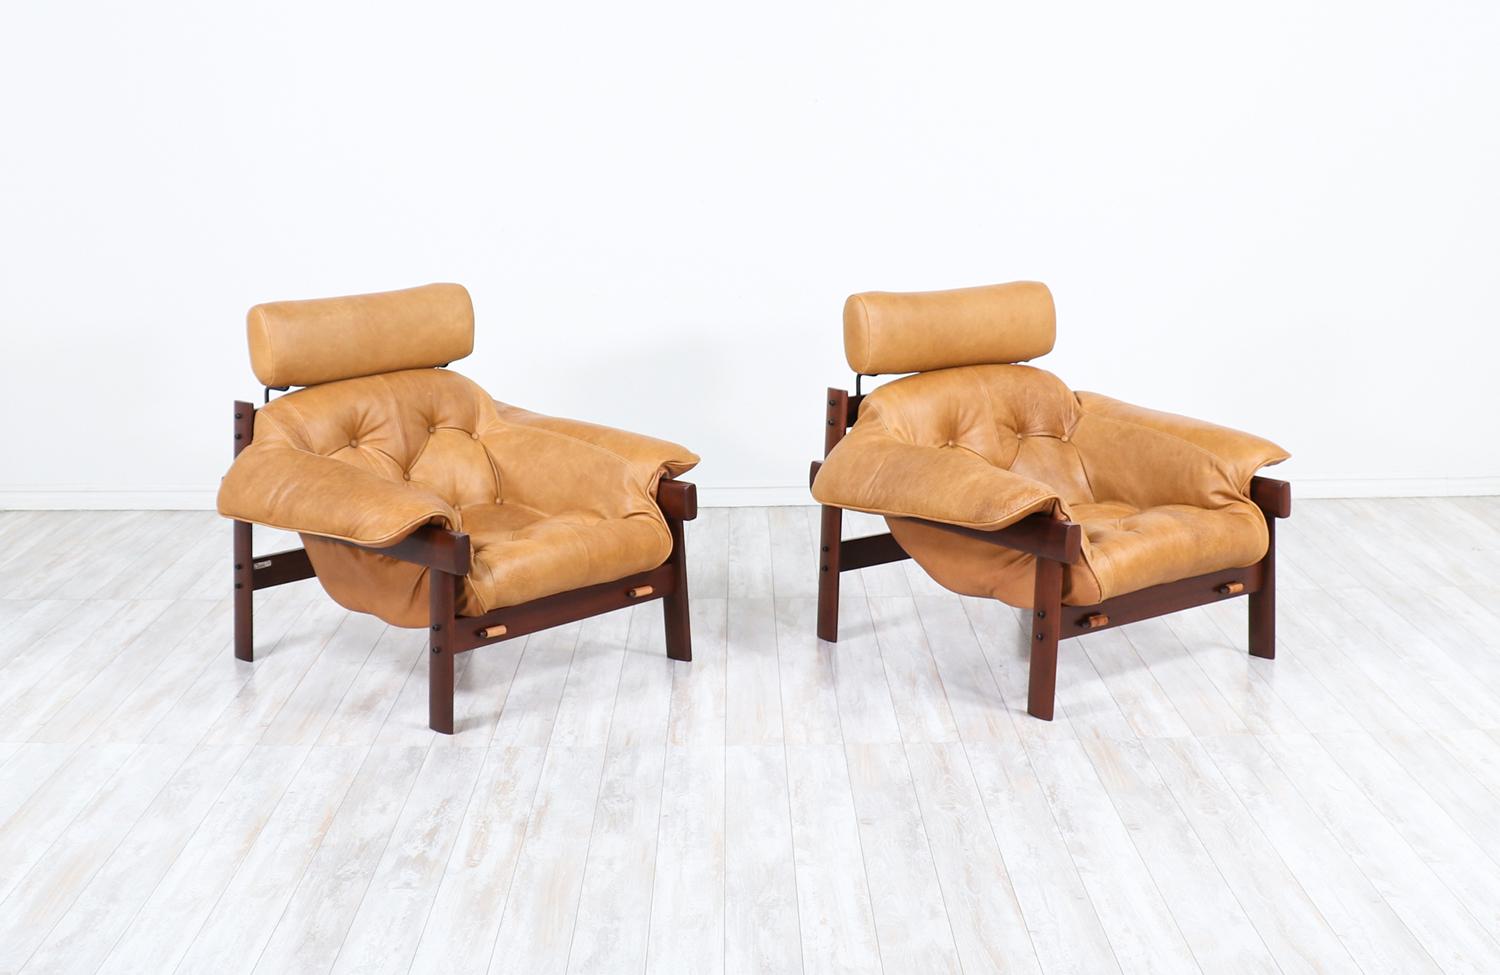 Percival Lafer MP-41 series Brazilian leather lounge chairs.